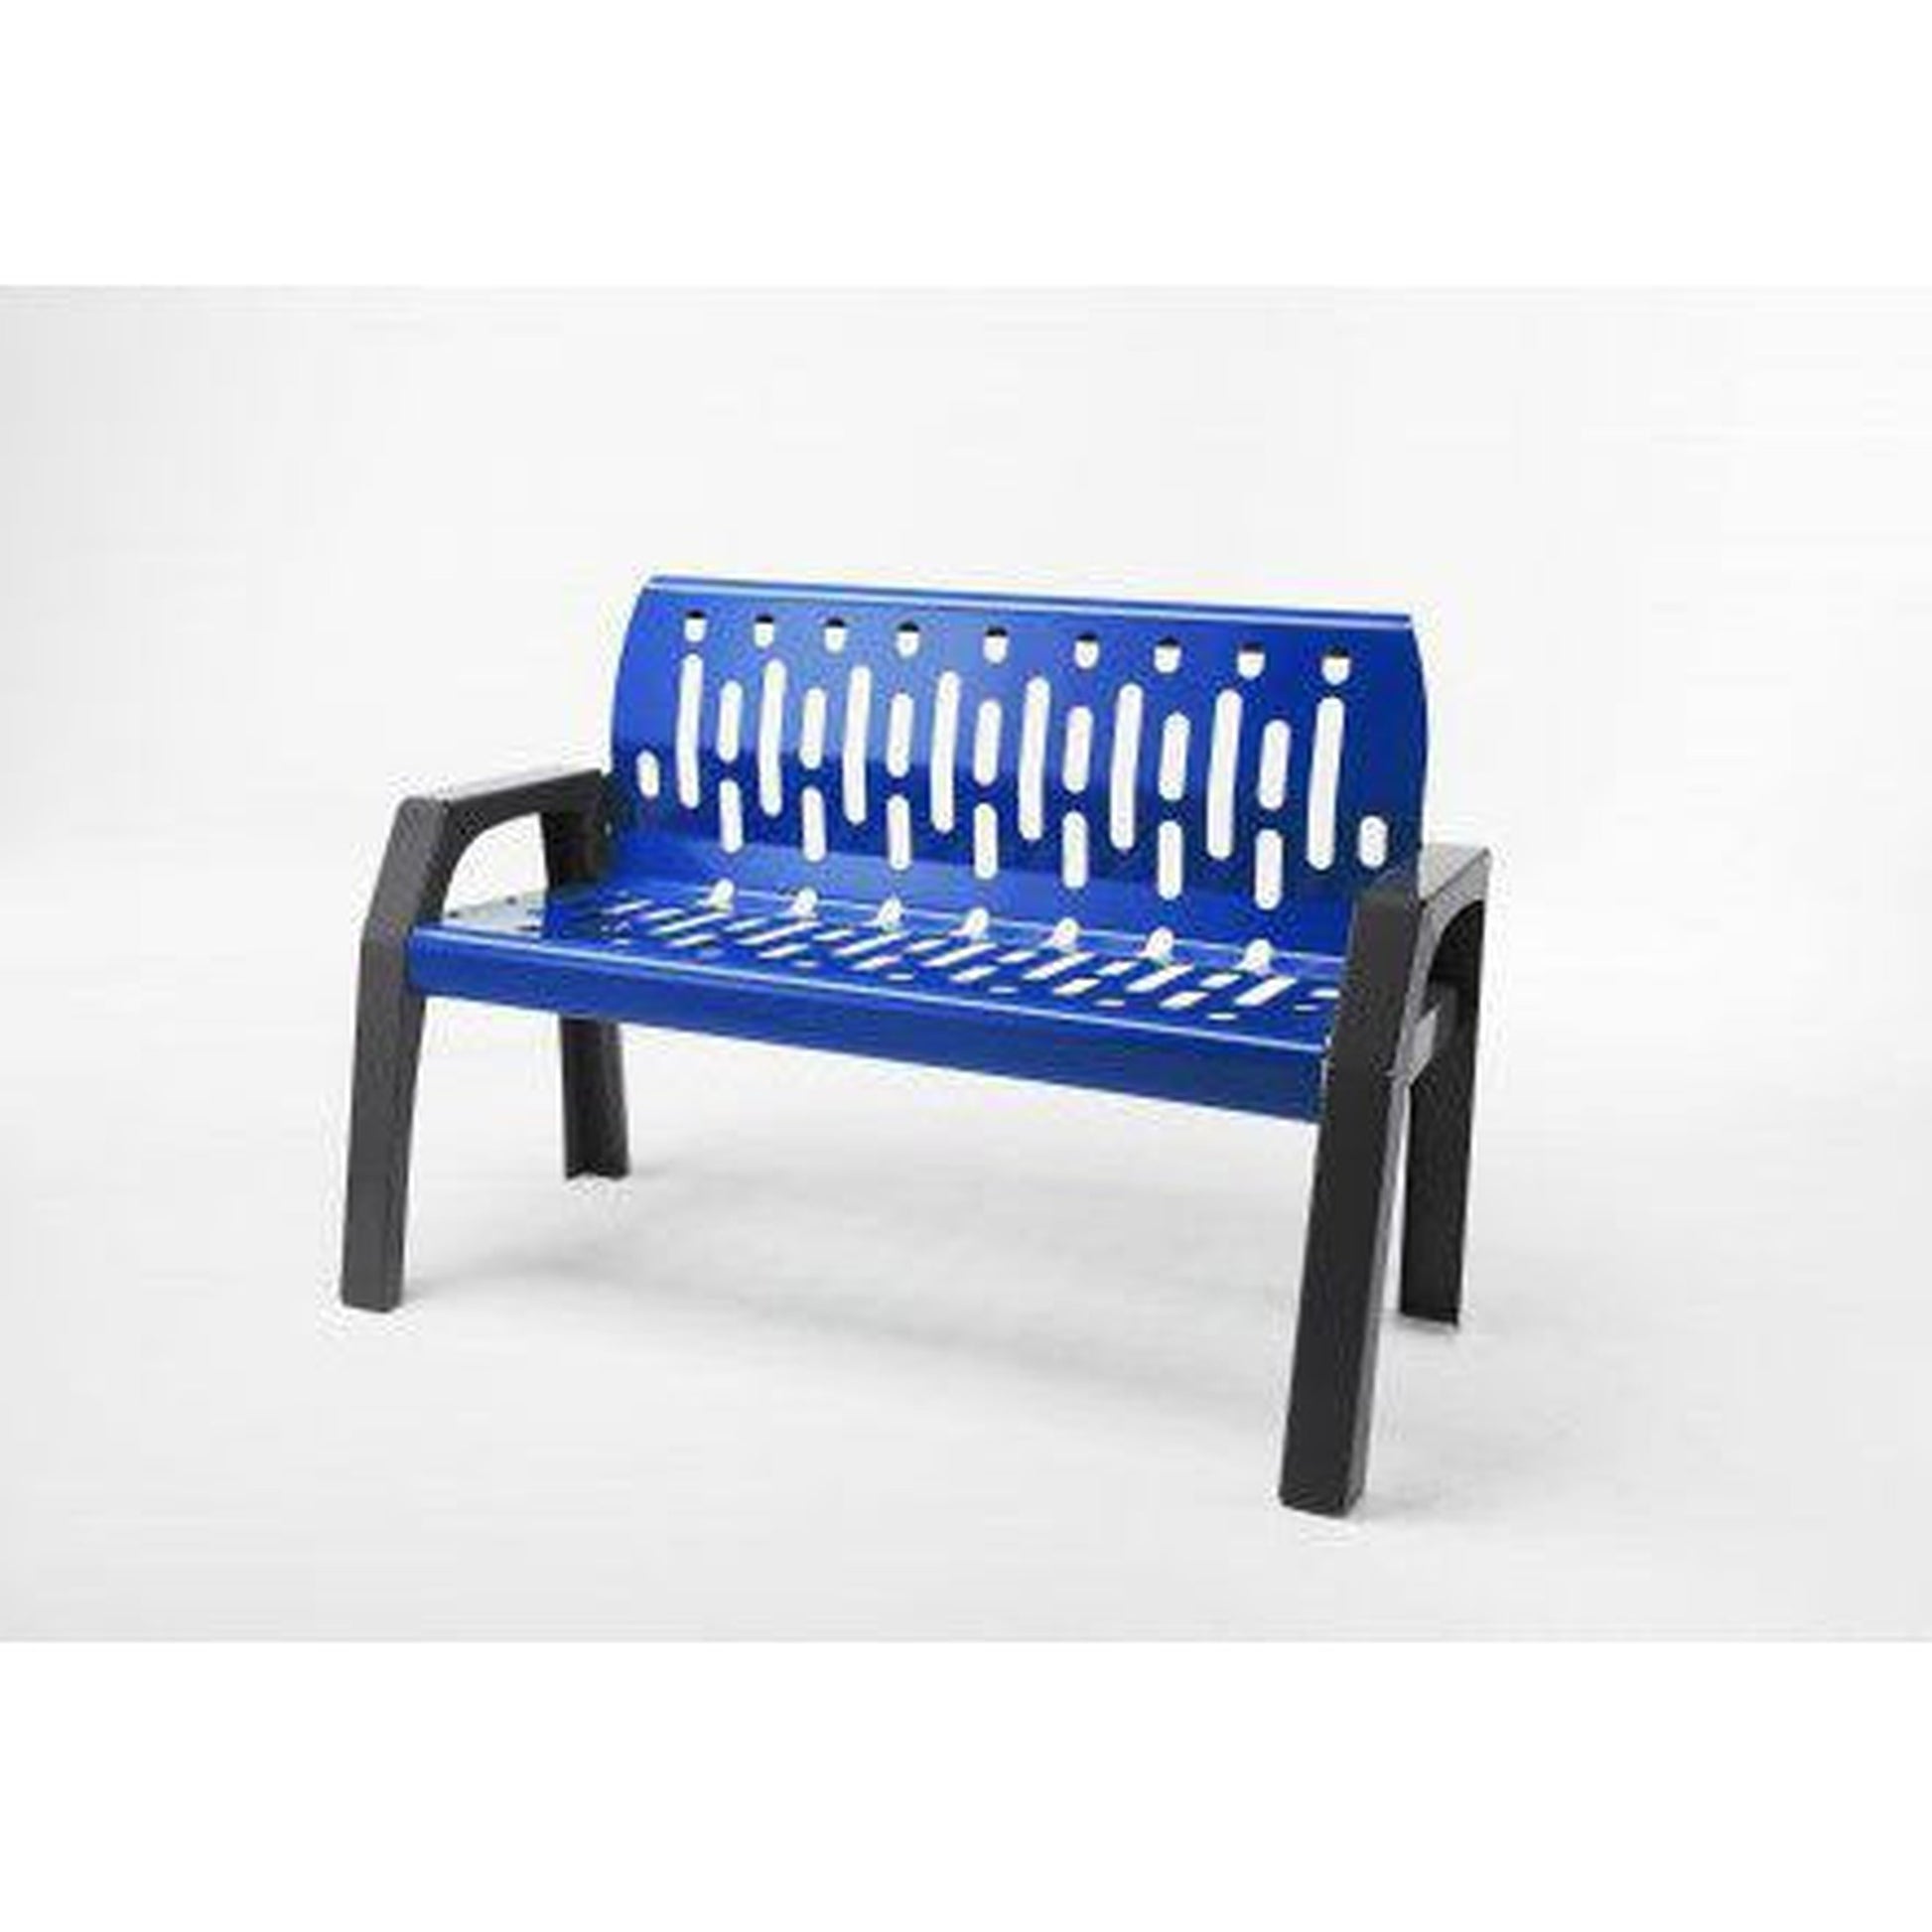 Frost 50.4 x 25.3 x 34.3 Blue Site Furnishings